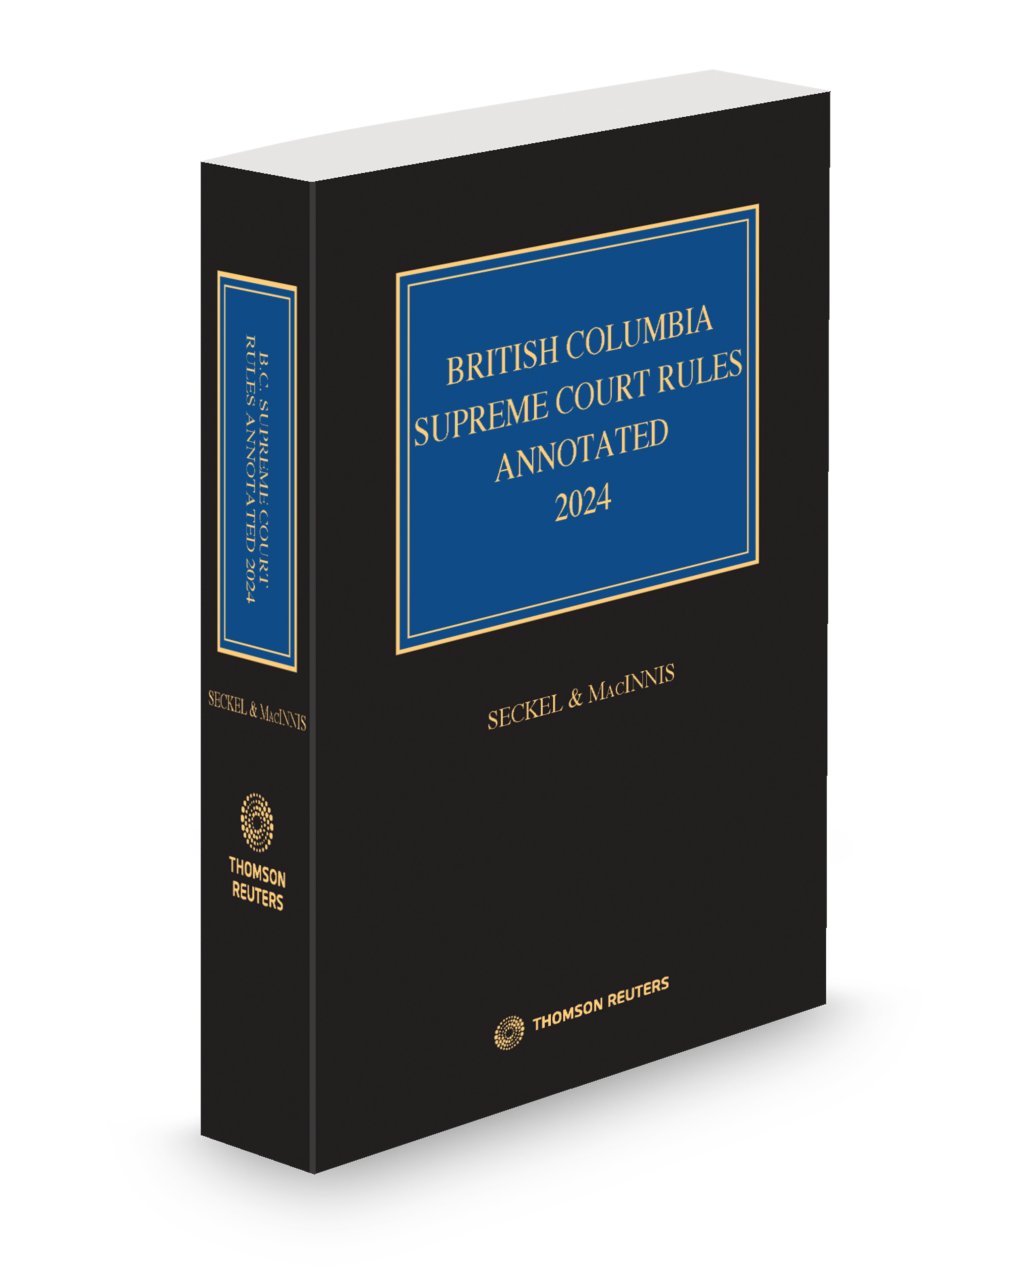 British Columbia Supreme Court Rules Annotated 2024 - New Edition